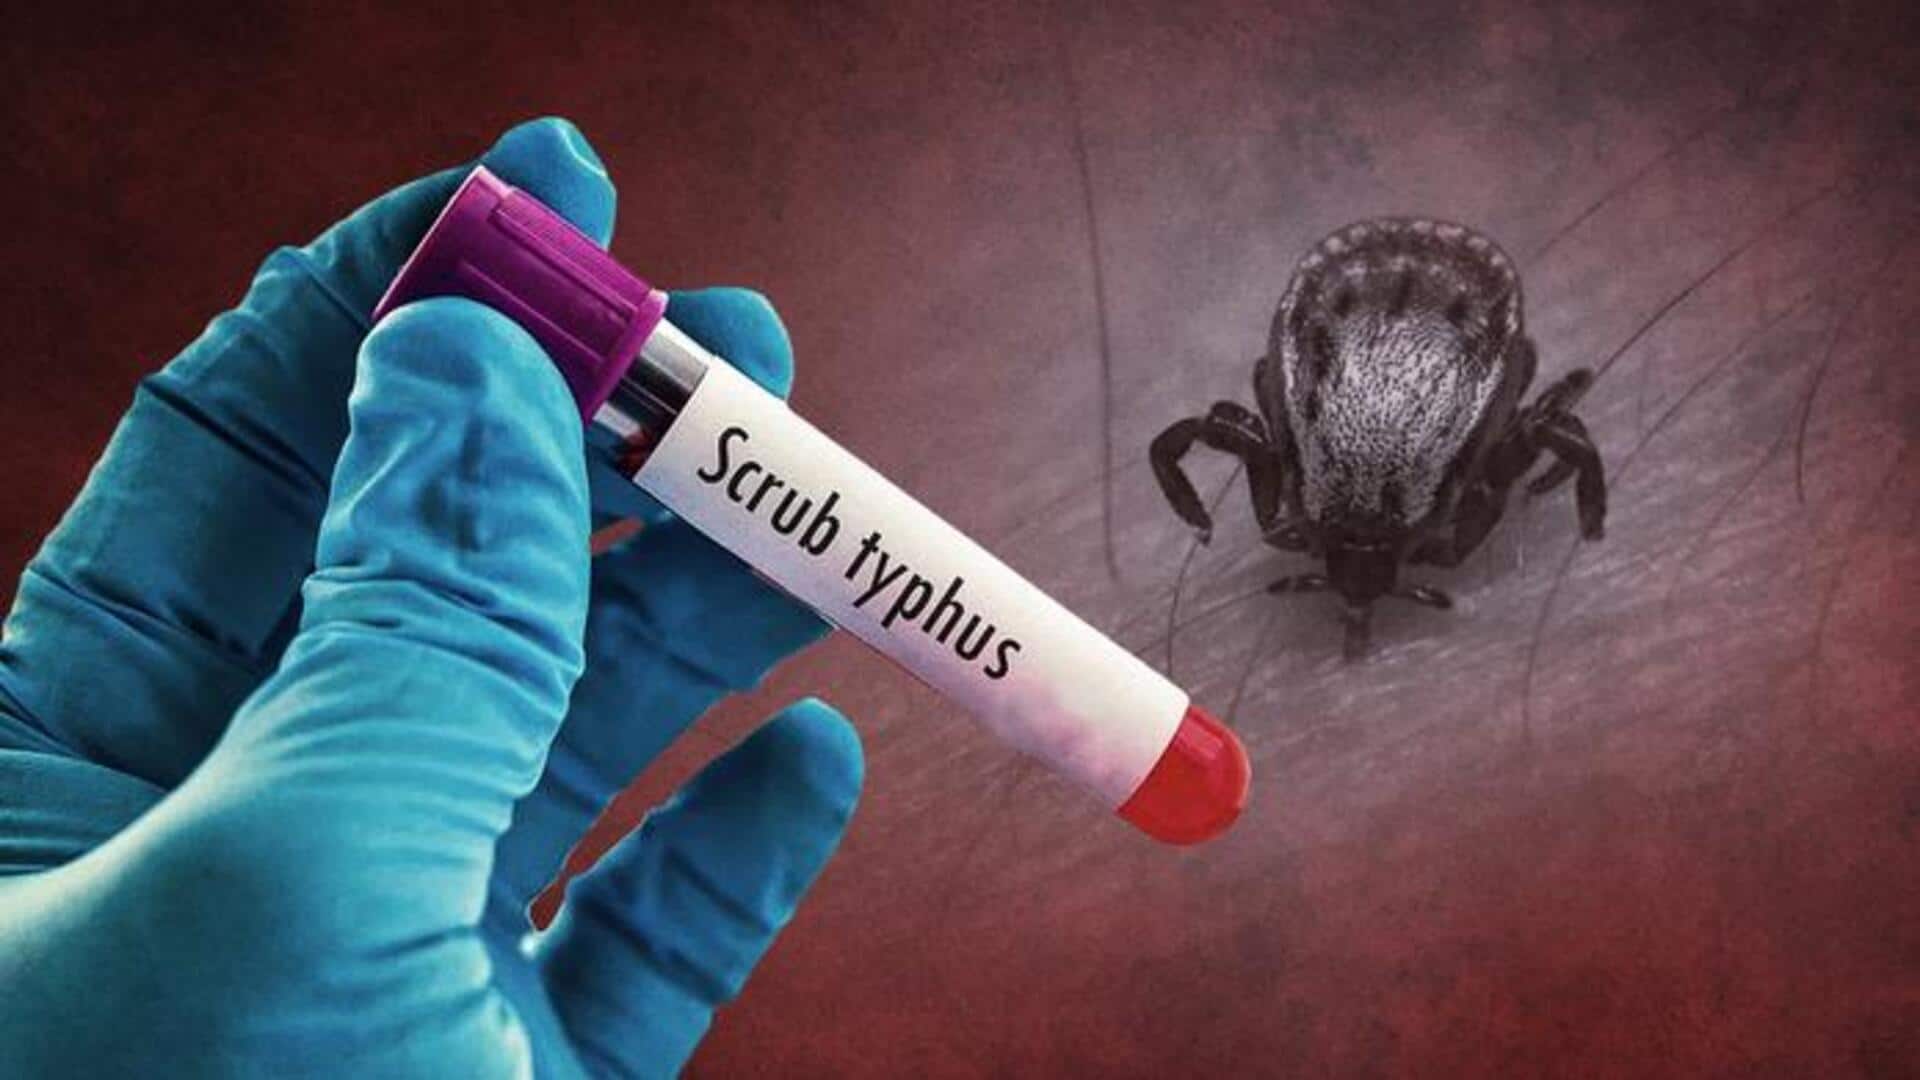 Odisha: Over 2,800 cases, 8 deaths from Scrub Typhus